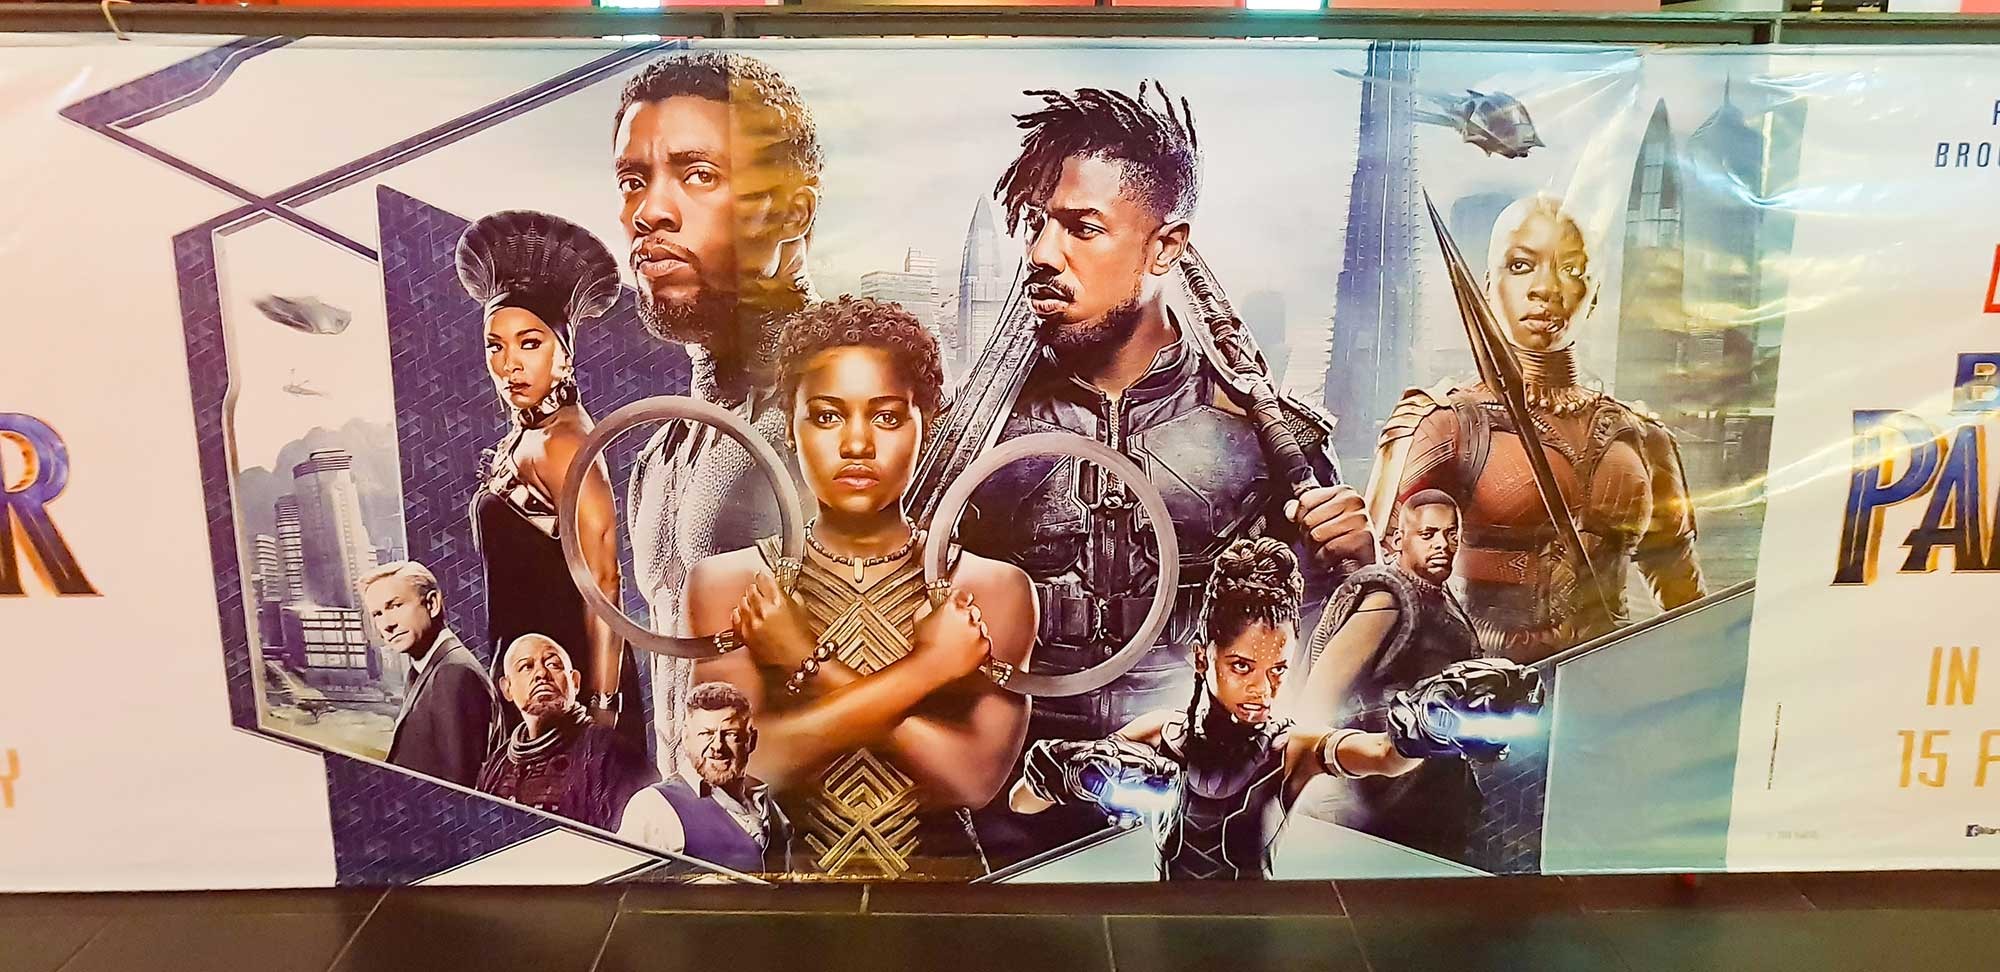 Black Panther movie poster, with characters from Wakanda